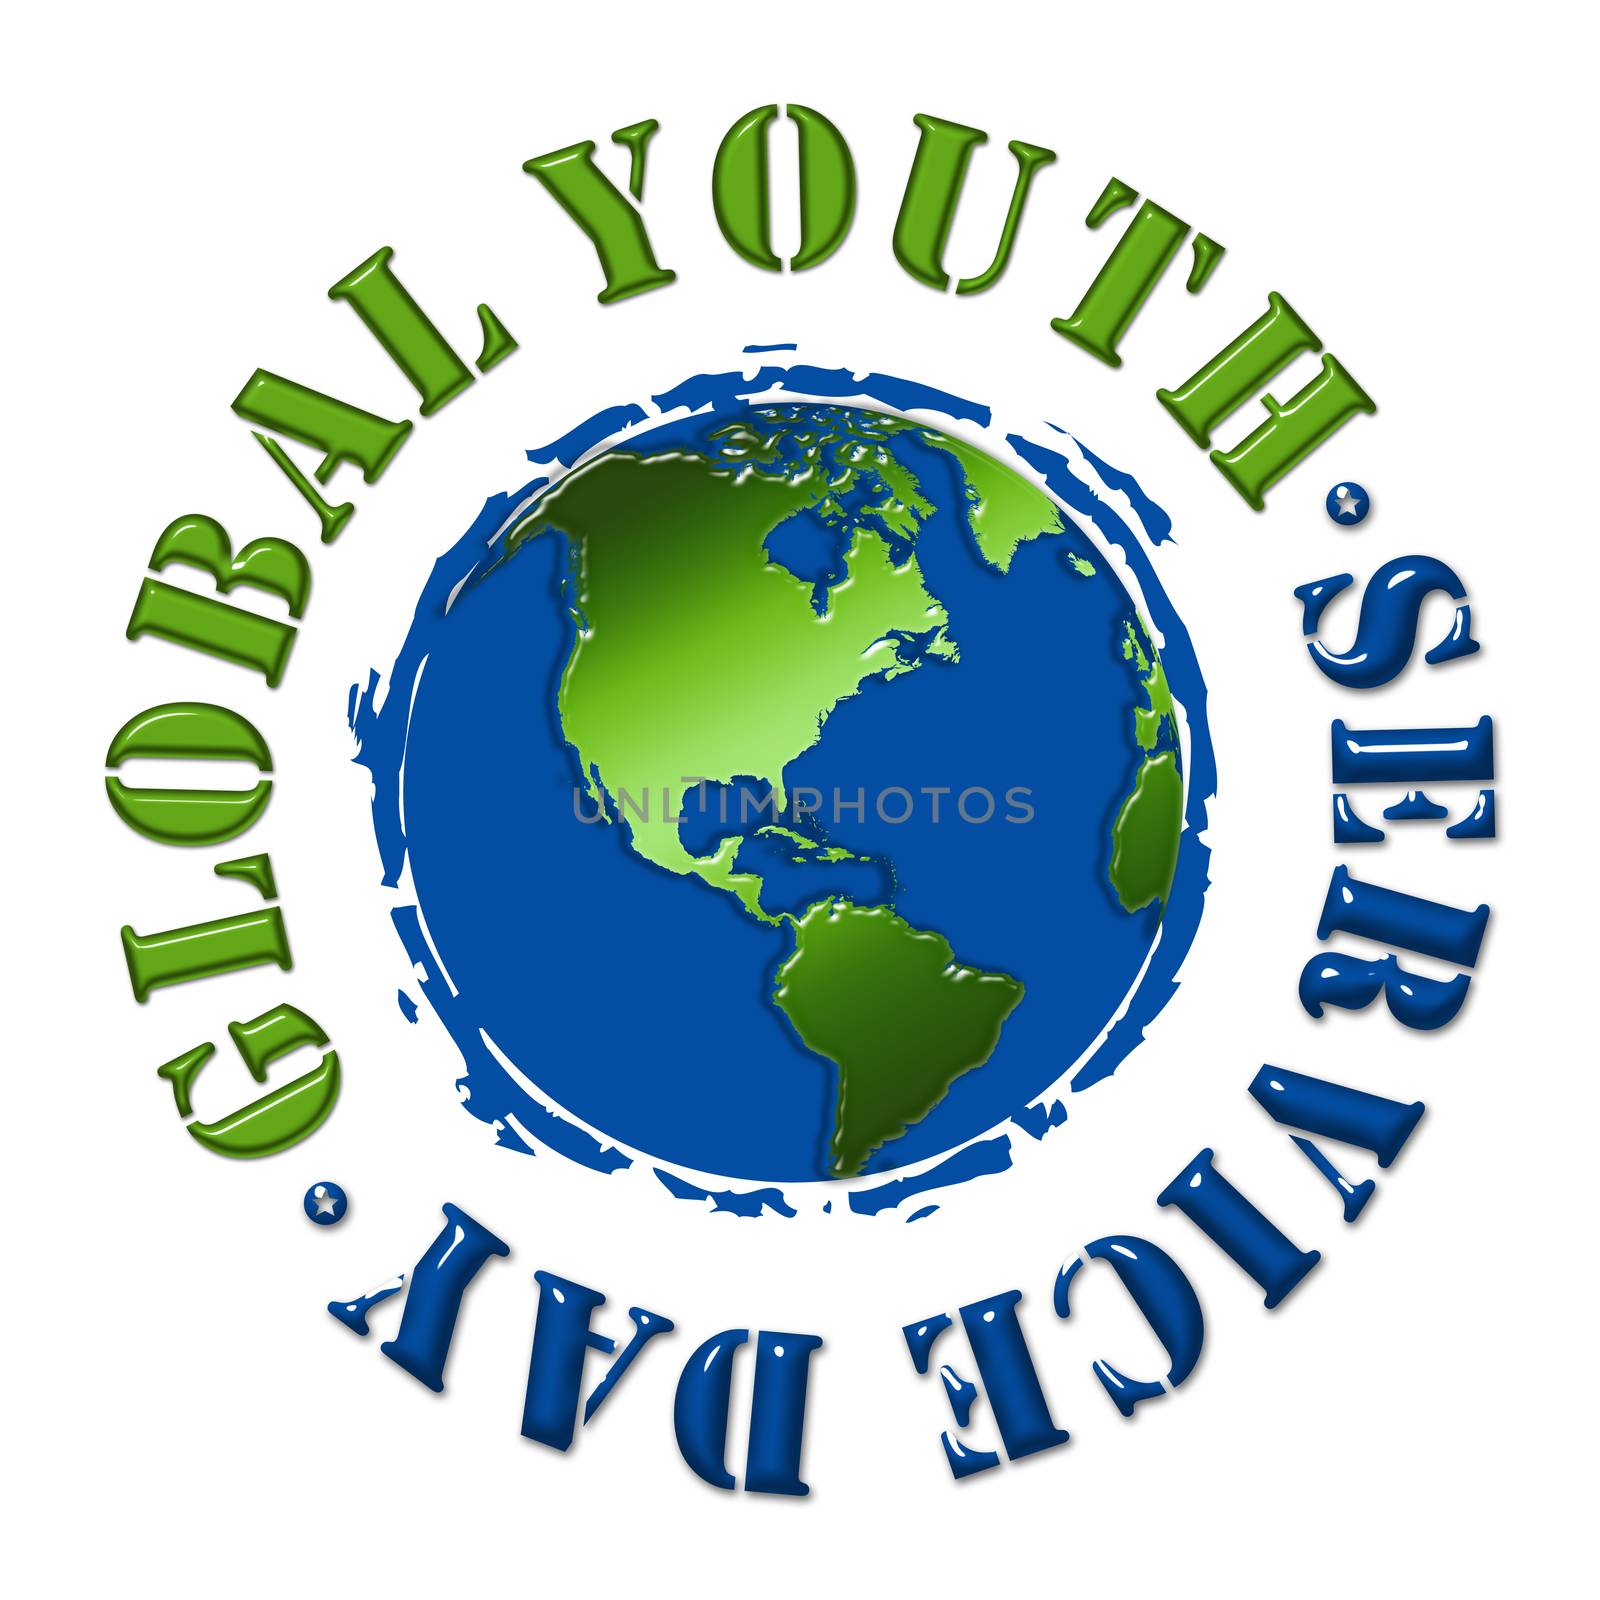 Global Youth Service Day by tharun15